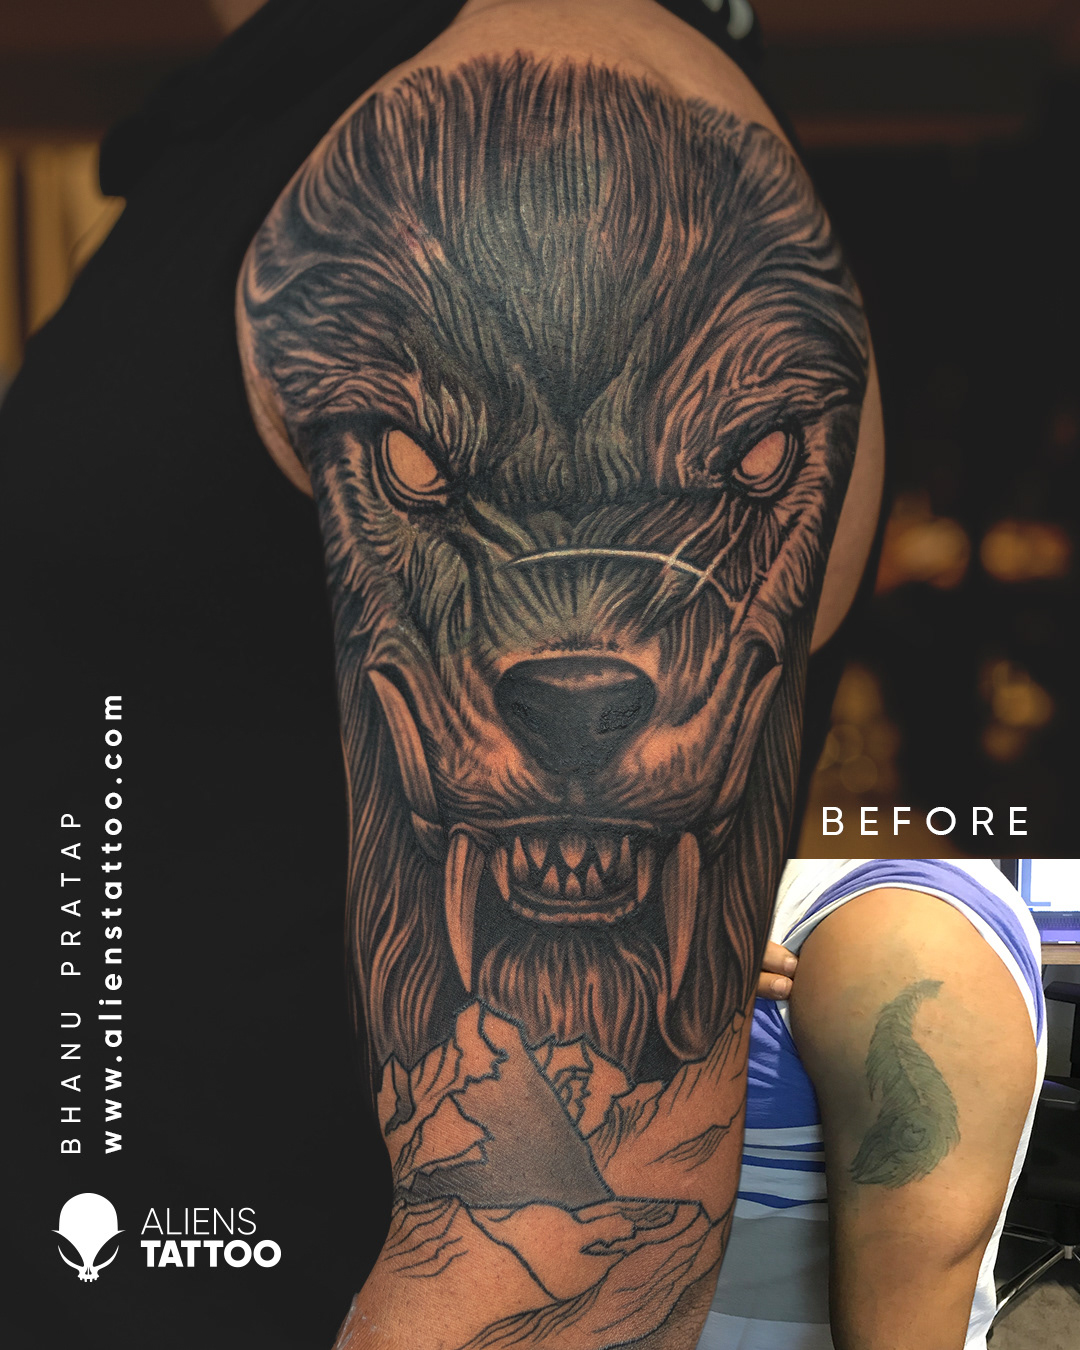 Tattoo cover up ideas by Inkaholik